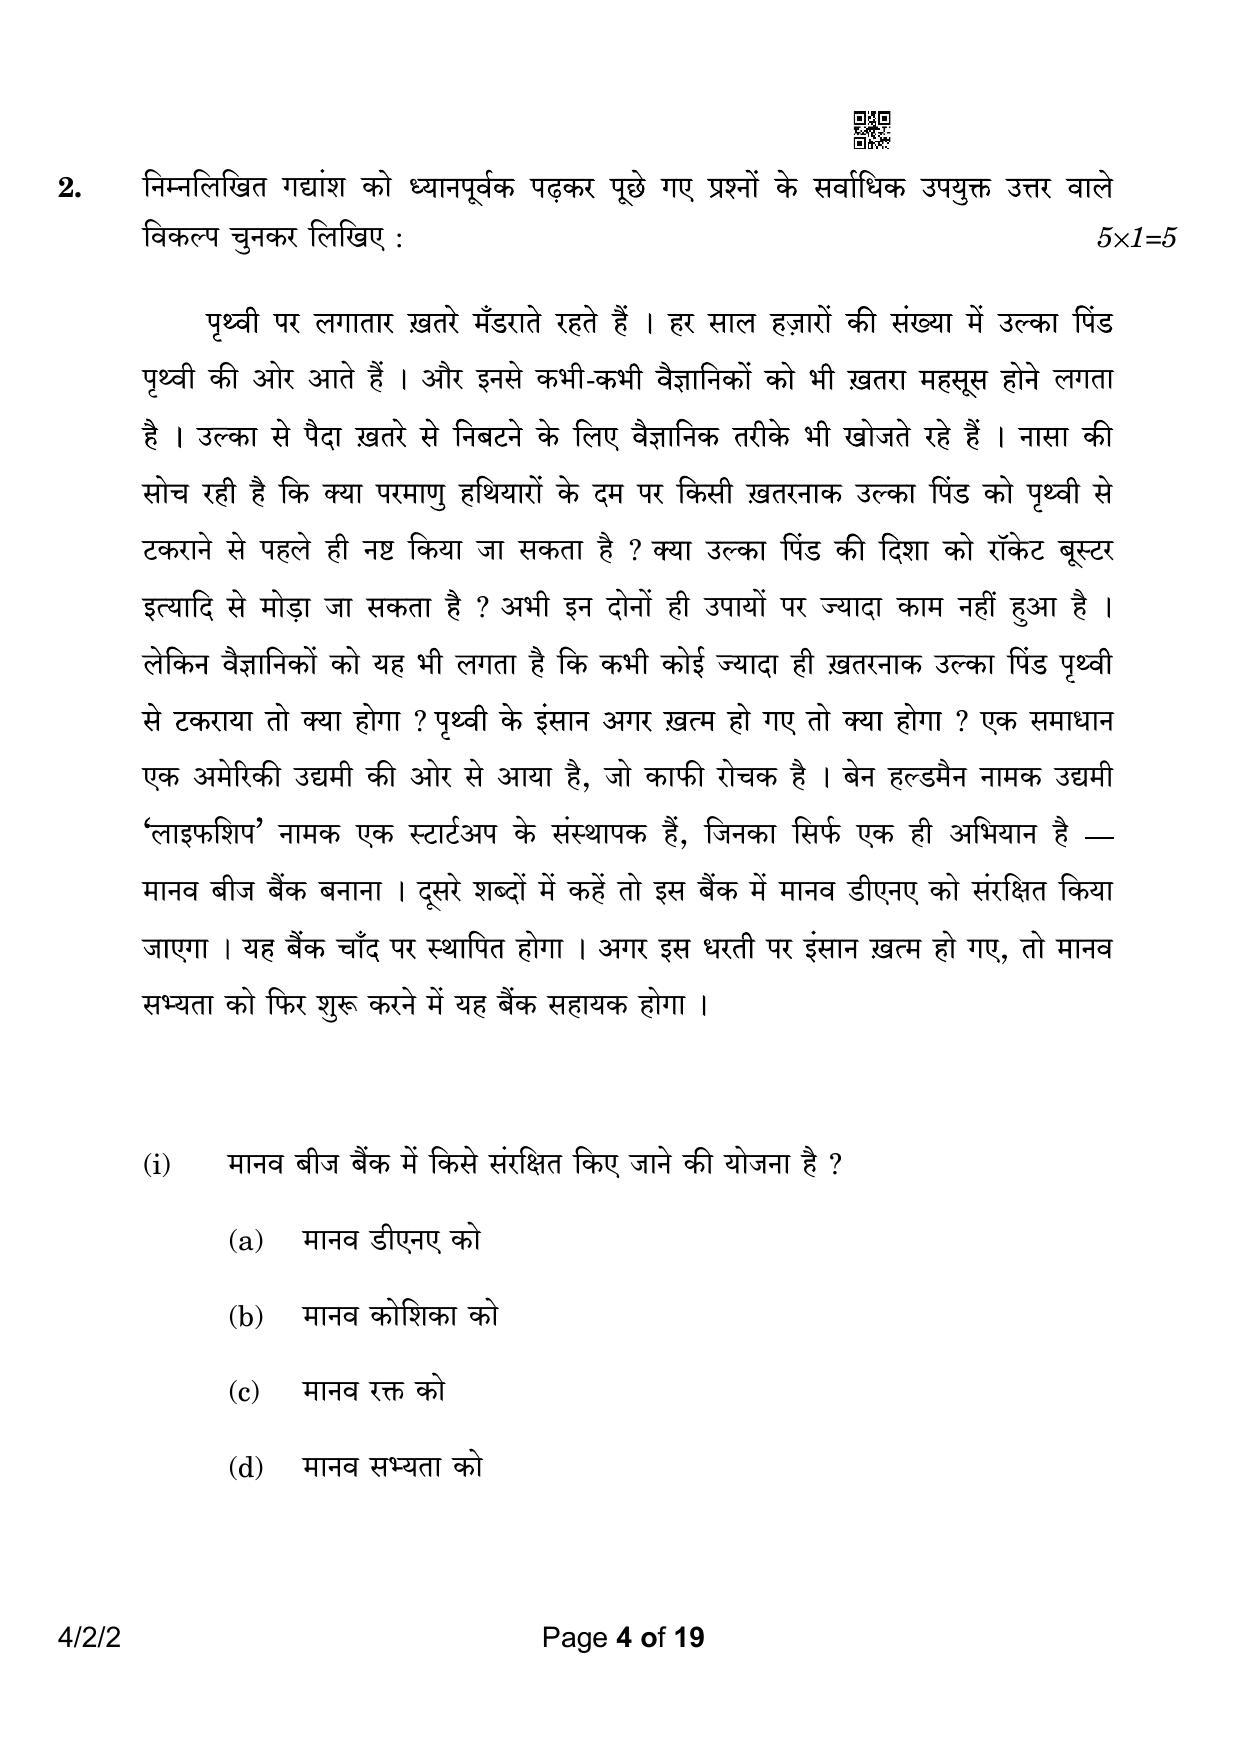 CBSE Class 10 4-2-2 Hindi B 2023 Question Paper - Page 4